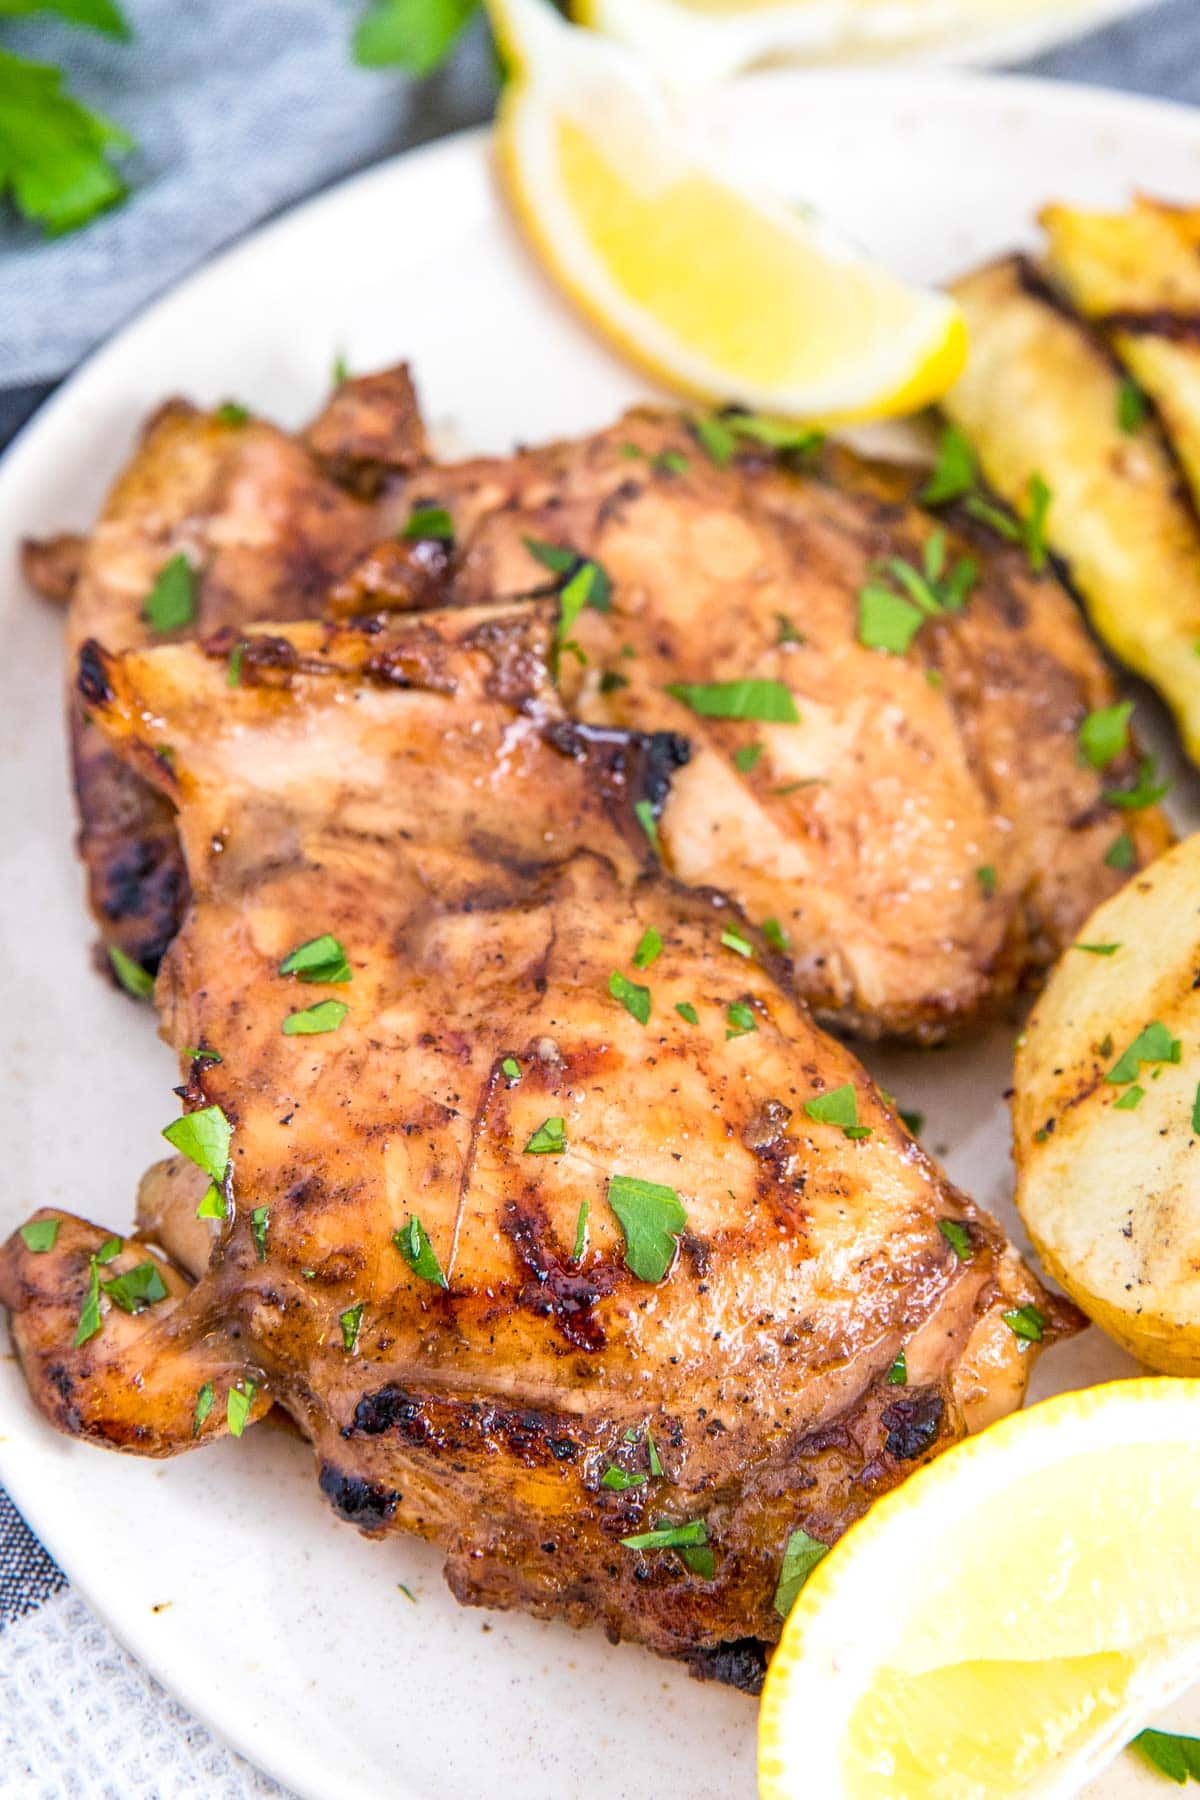 Grilled chicken thighs, potaotes and lemon on a white plate.